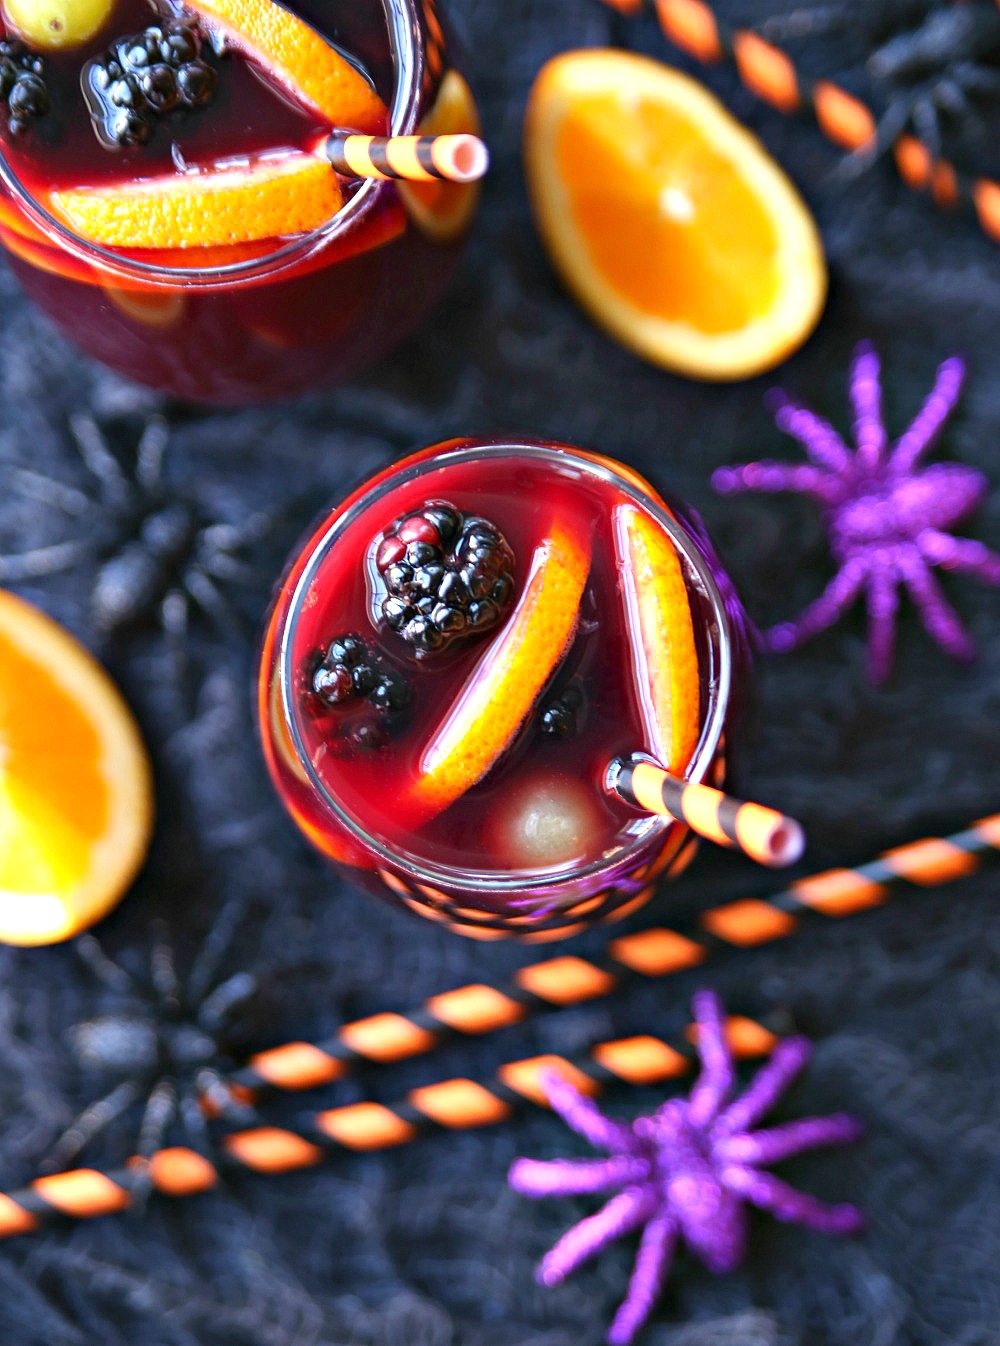 This Halloween Sangria is an easy make-ahead cocktail perfect for all your spooktacular Halloween festivities.